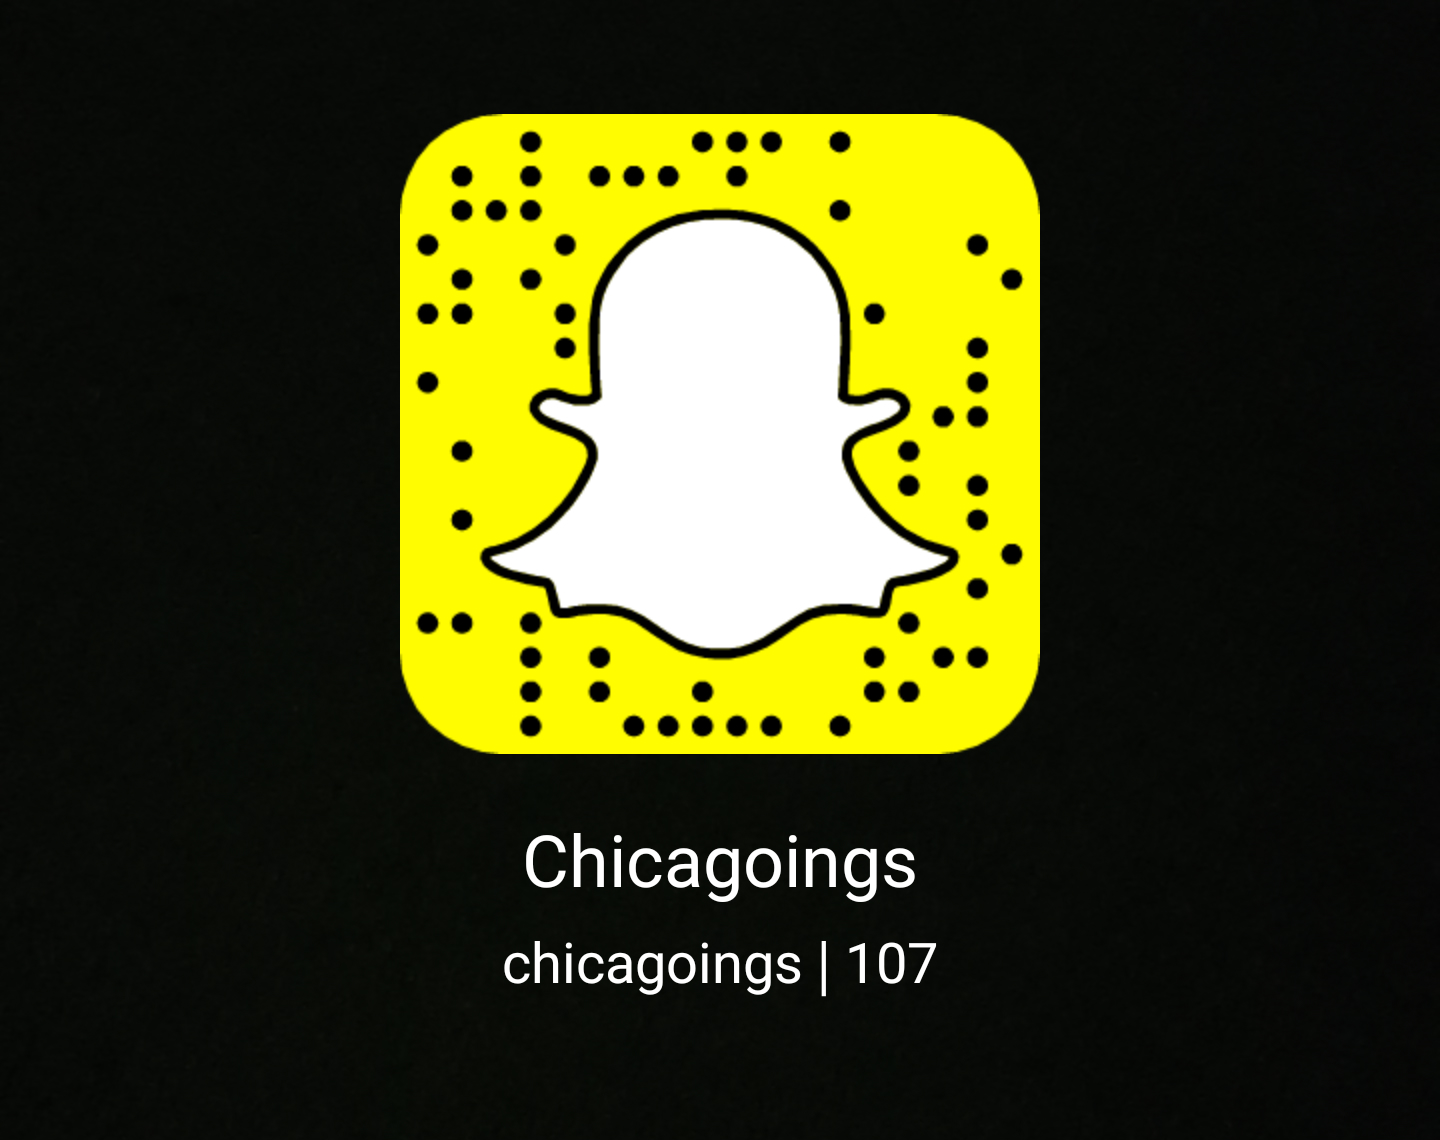 Chicagoings on Snapchat